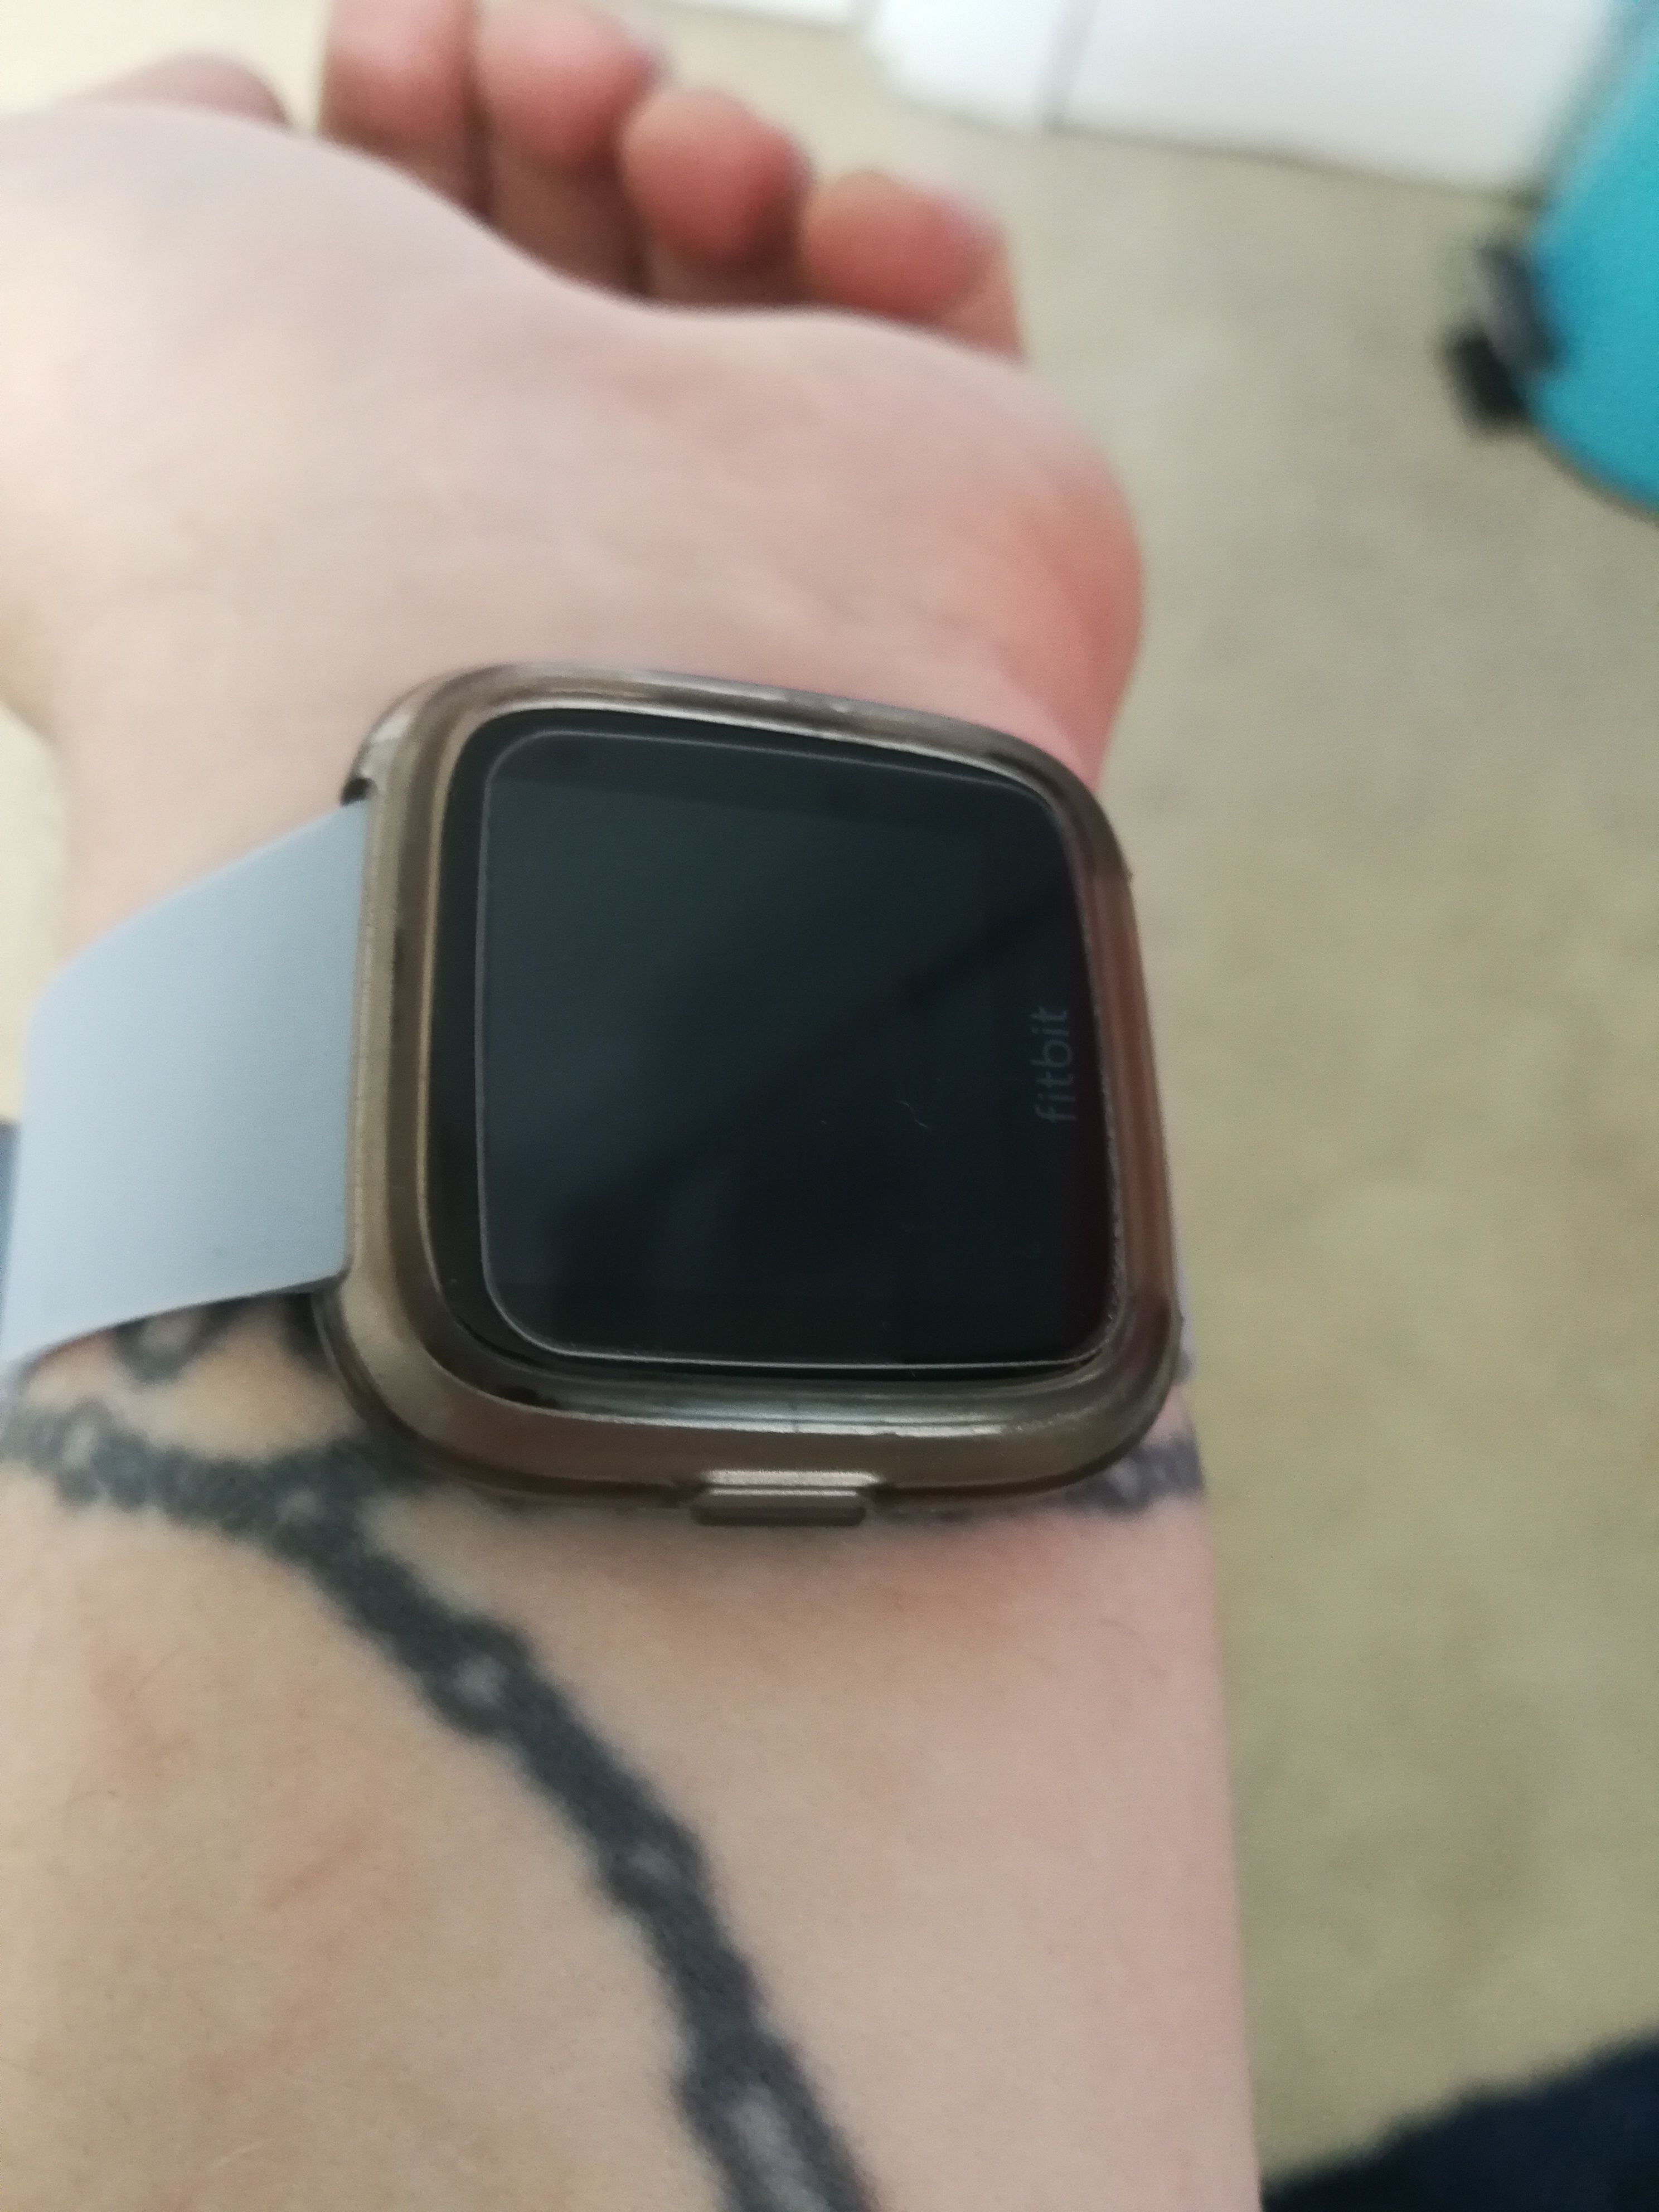 Versa screen is scratched - Fitbit 